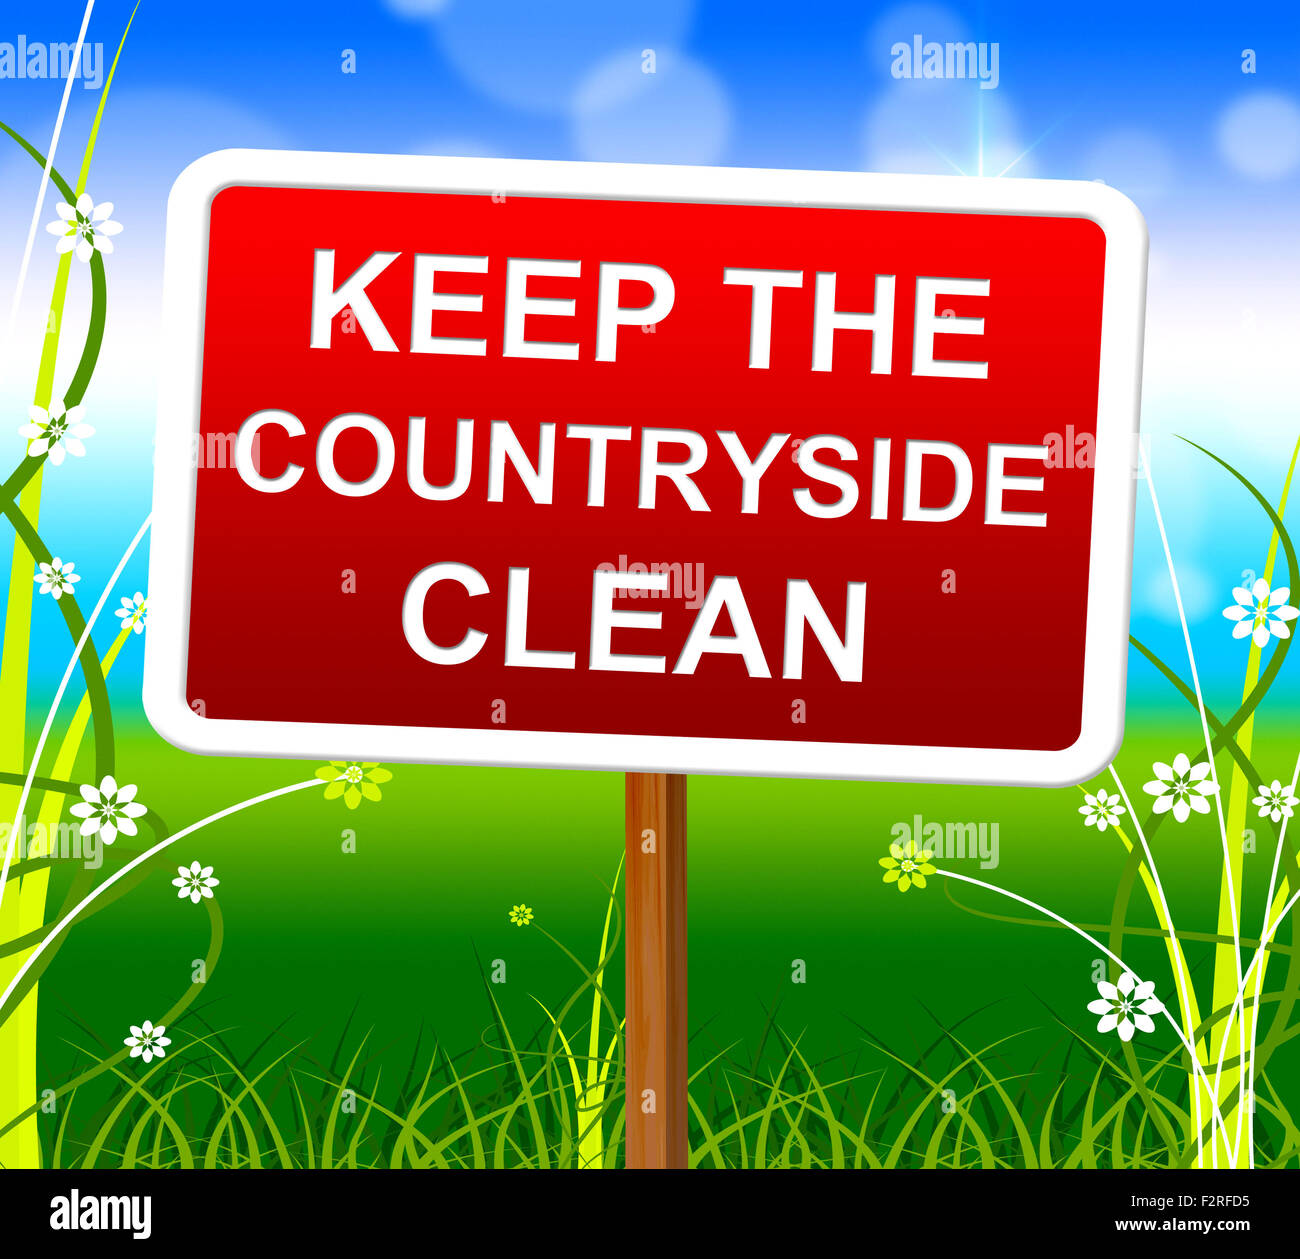 Keep Countryside Clean Indicating Natural Meadows And Scene Stock Photo